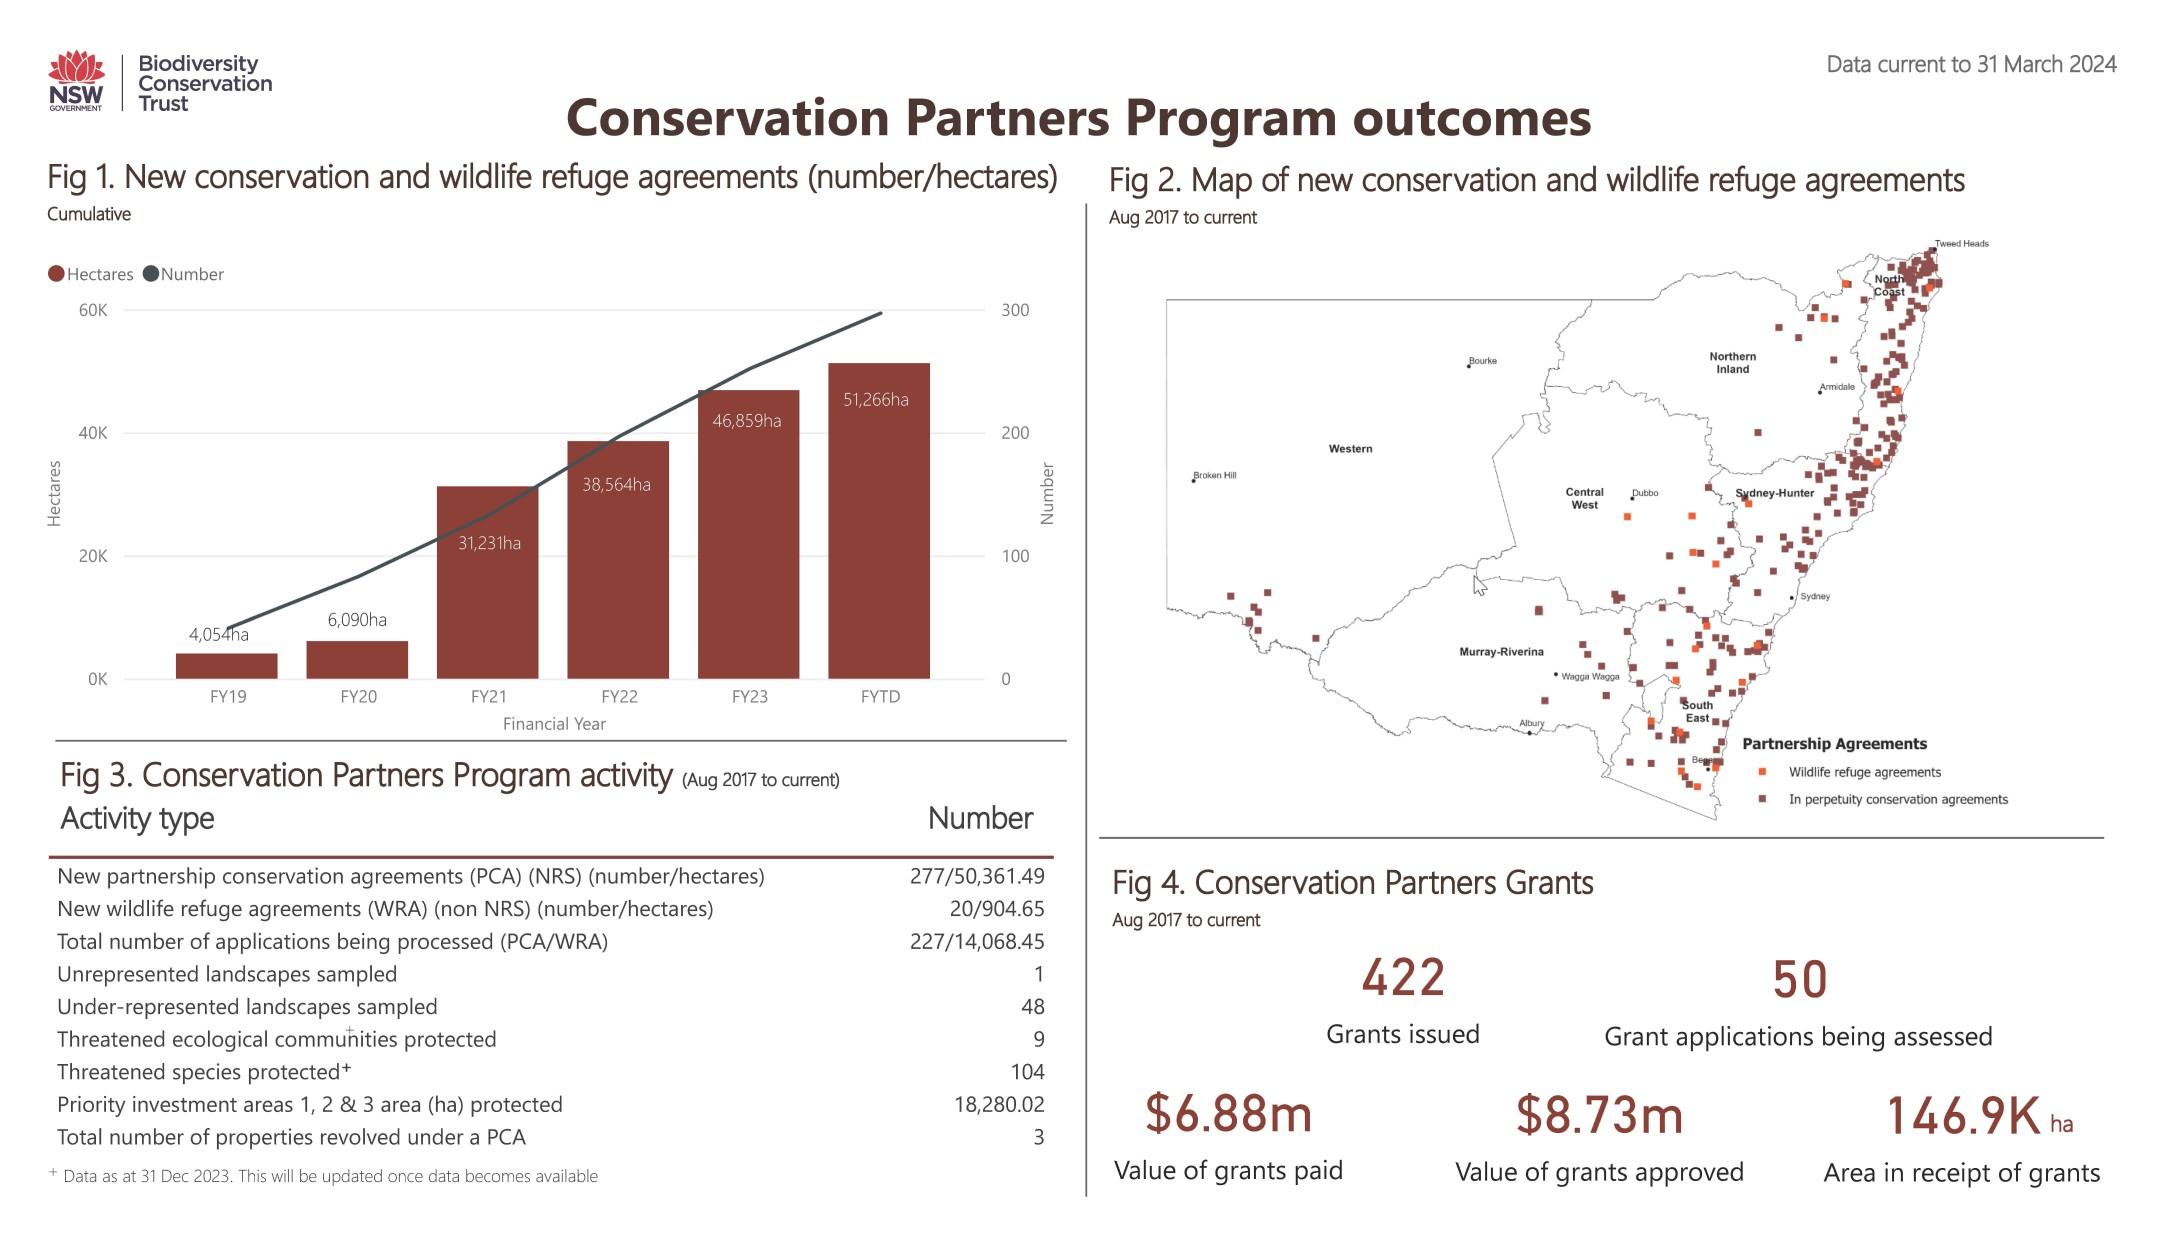 Conservation Partners Program dashboard data as at 31 March 2024